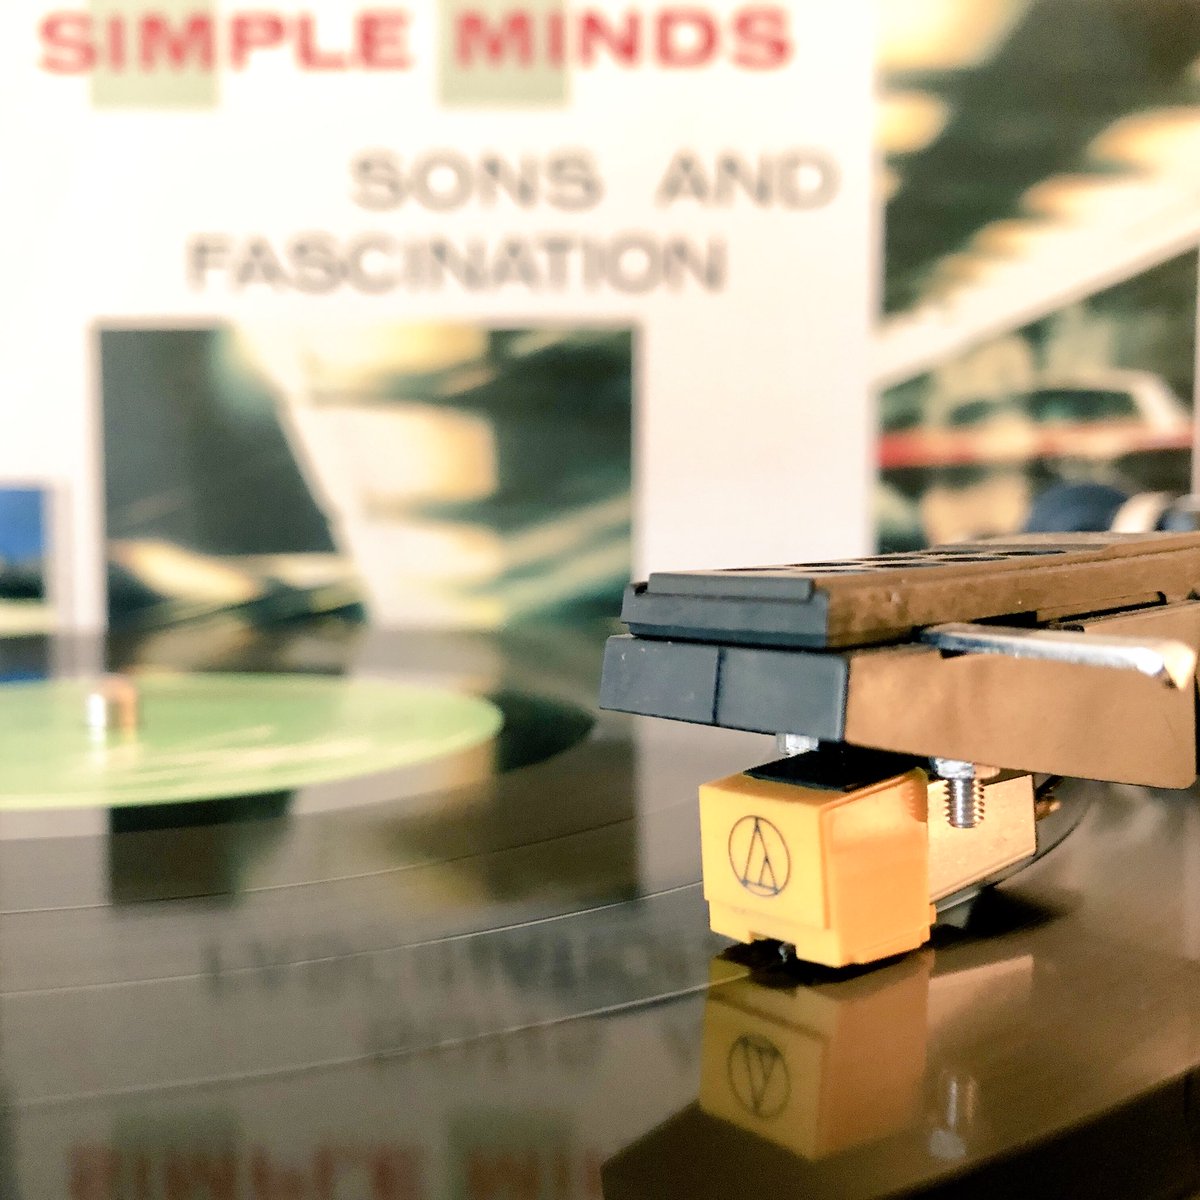 Simple Minds • Sons and fascination #musikammorgen #simpleminds #sonsandfascination #vinyl #nowplaying #80s